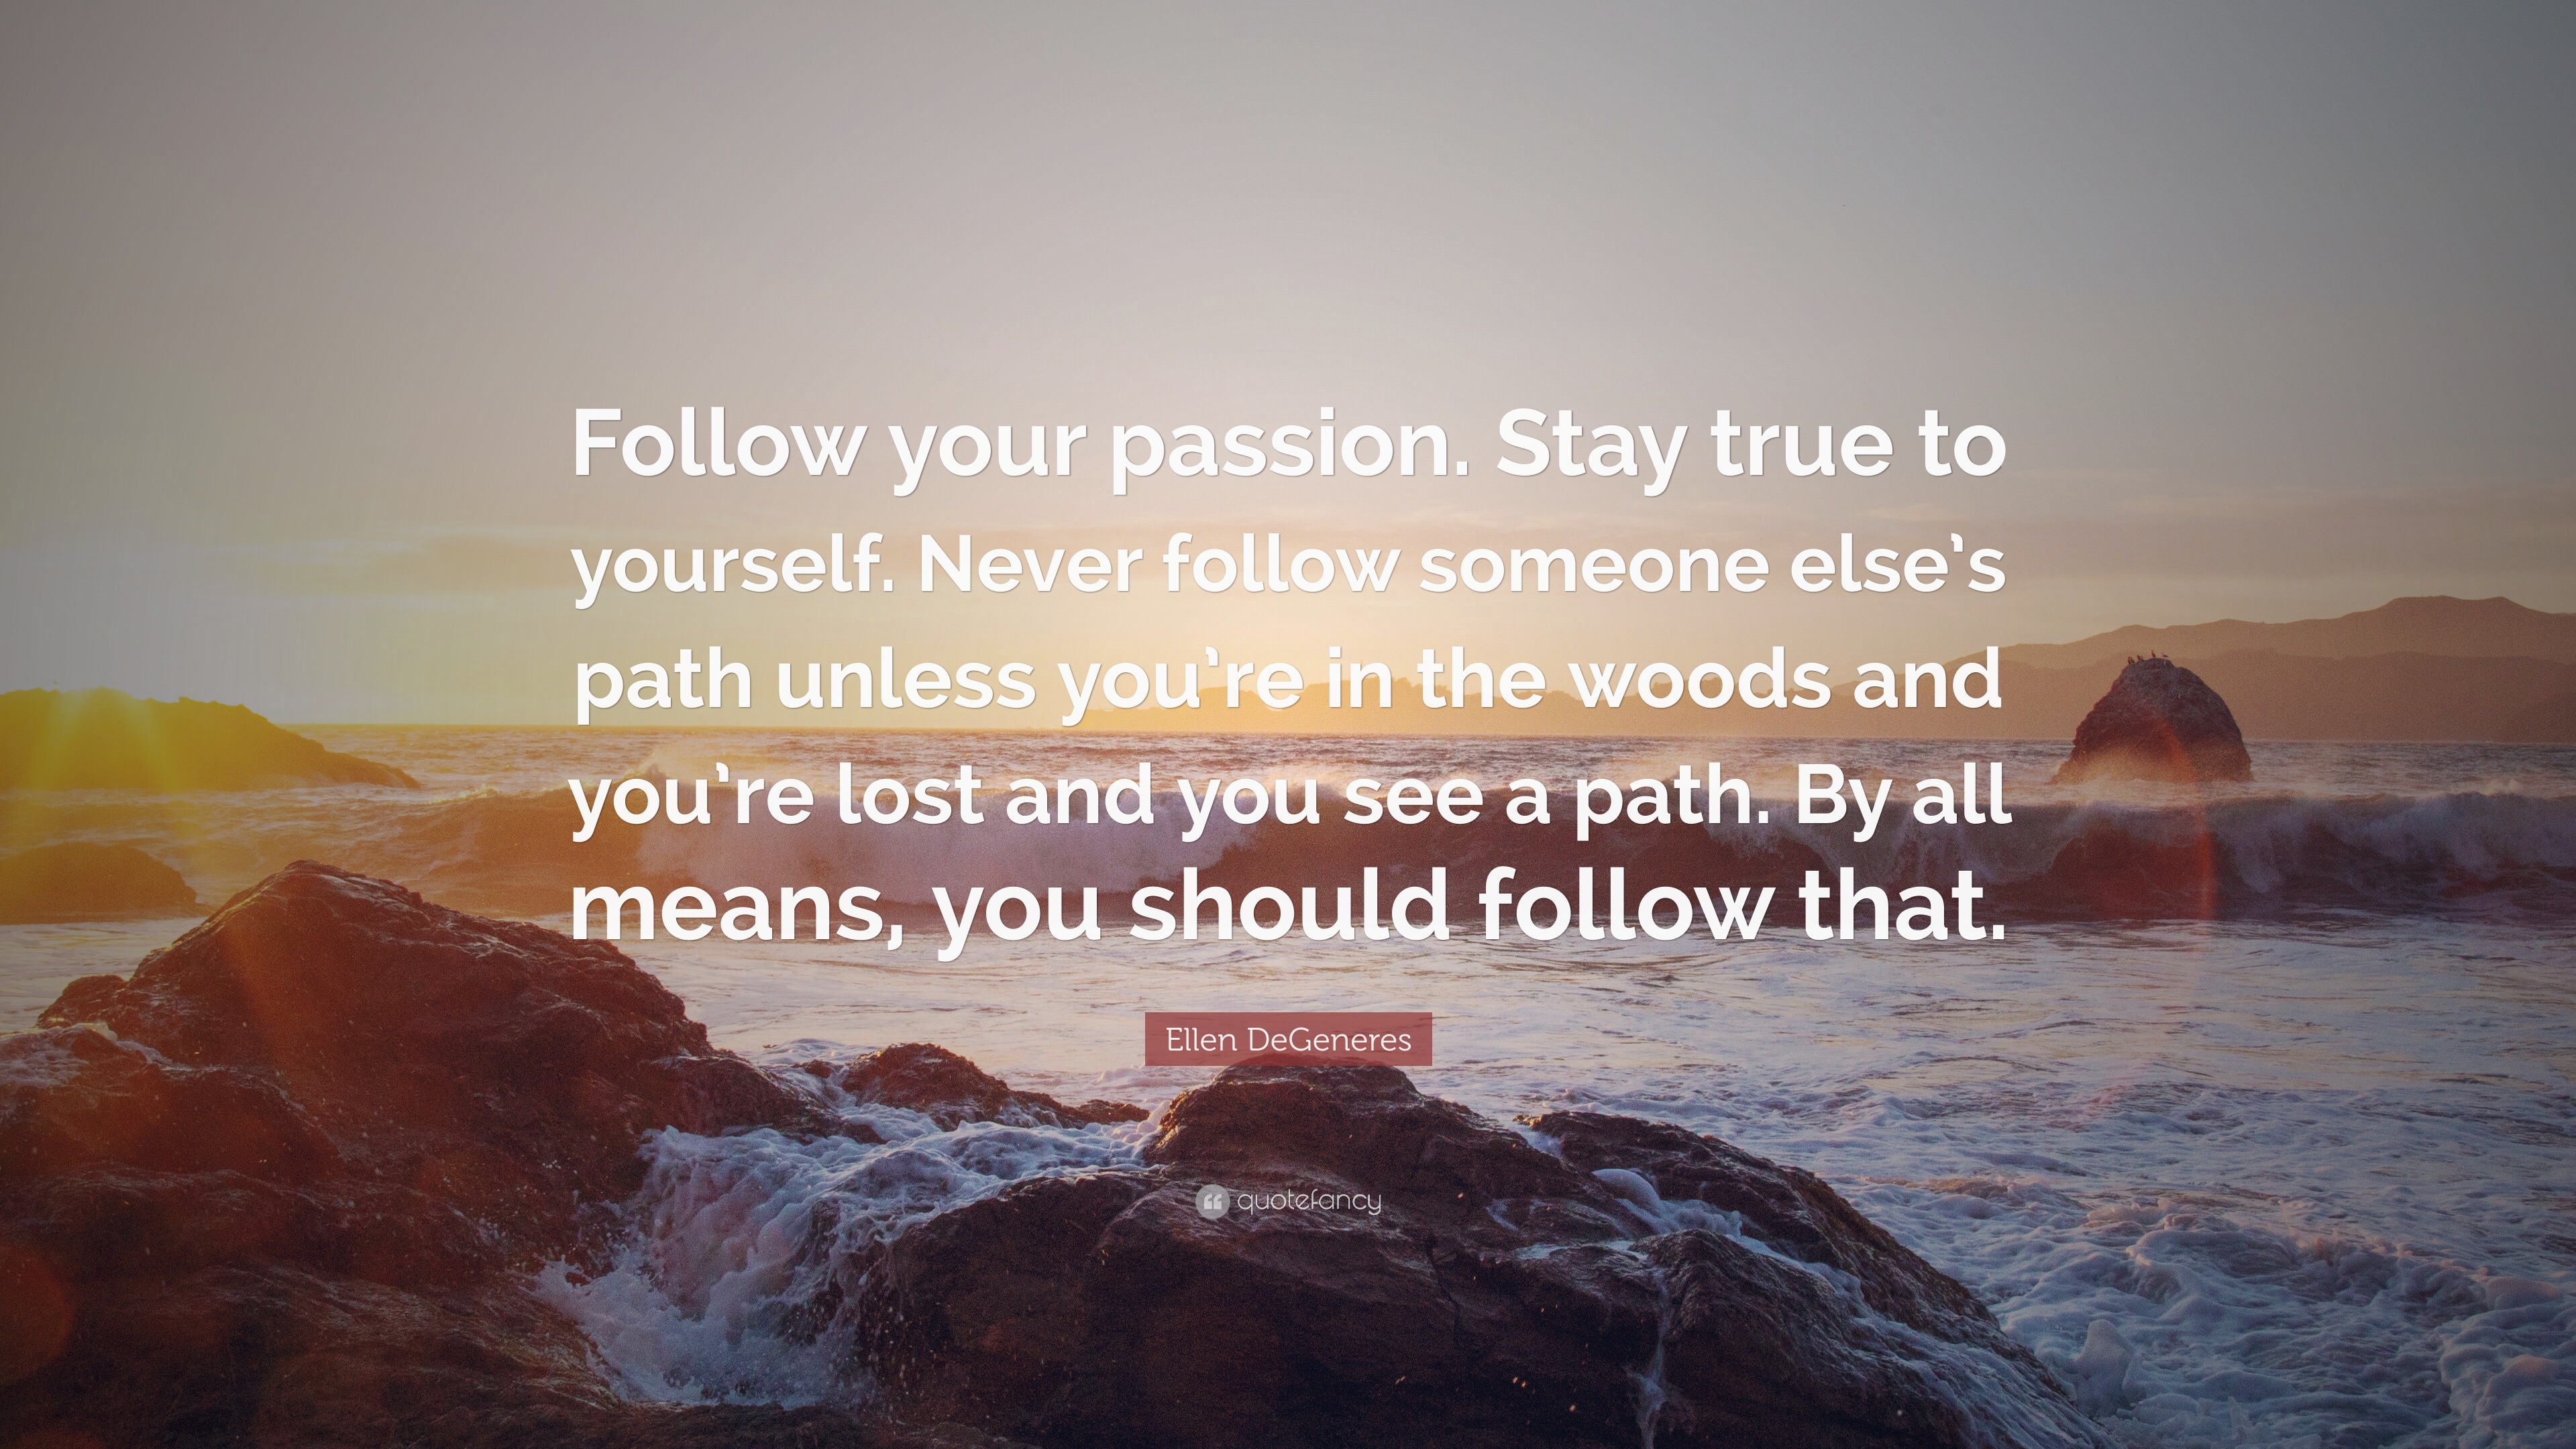 Ellen Degeneres Quote “follow Your Passion Stay True To Yourself Never Follow Someone Elses